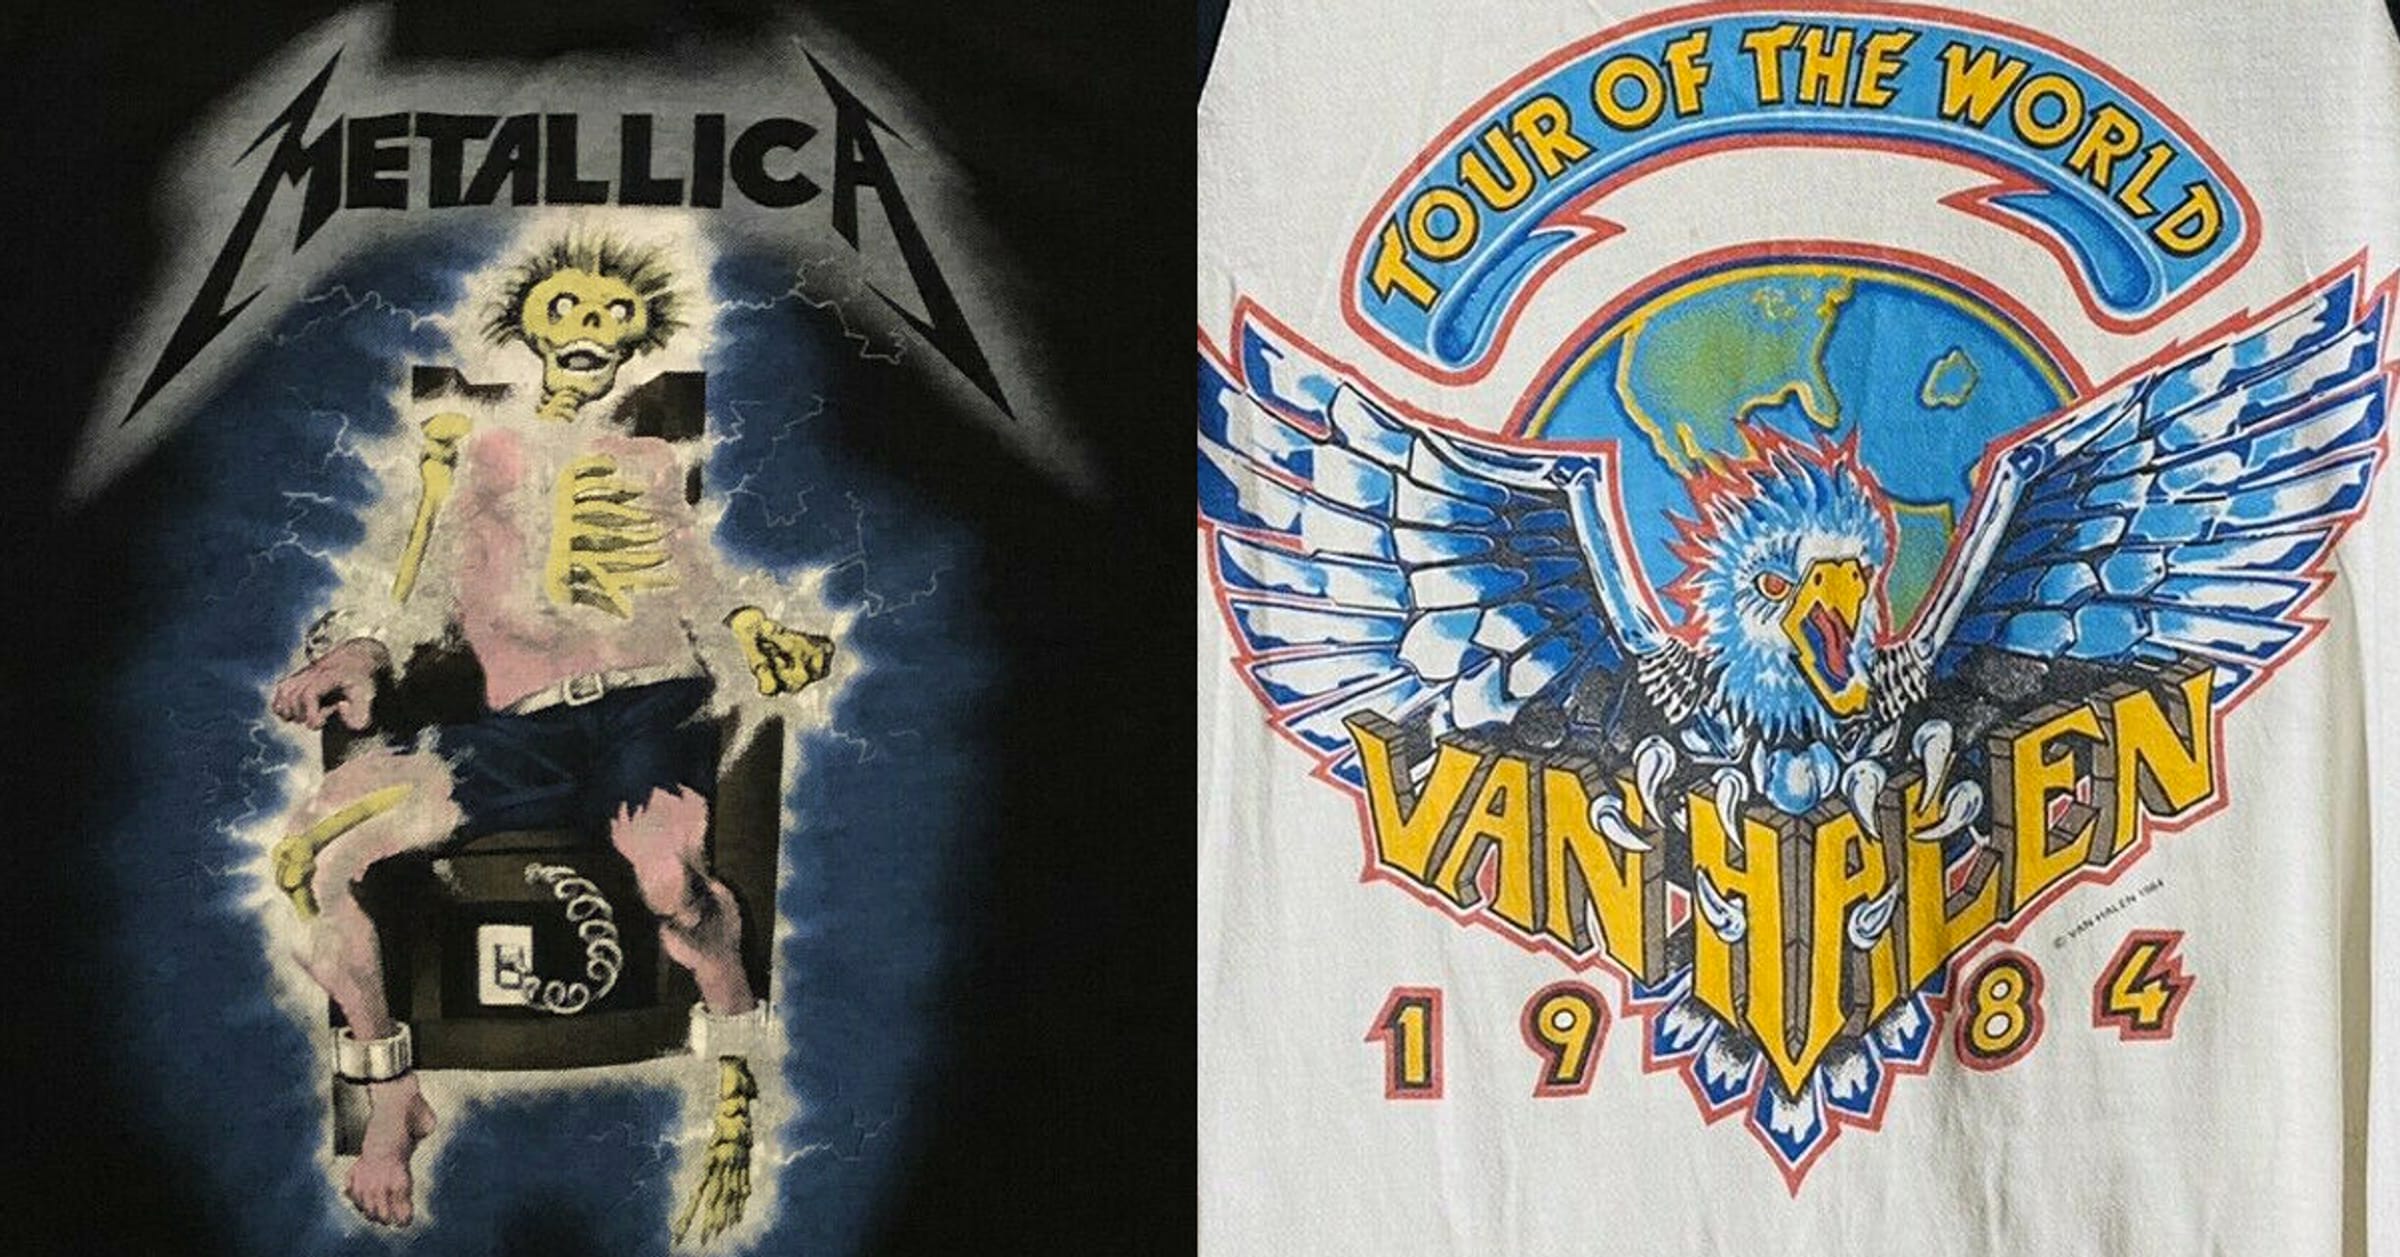 Rock Band T-Shirts From The 1980s